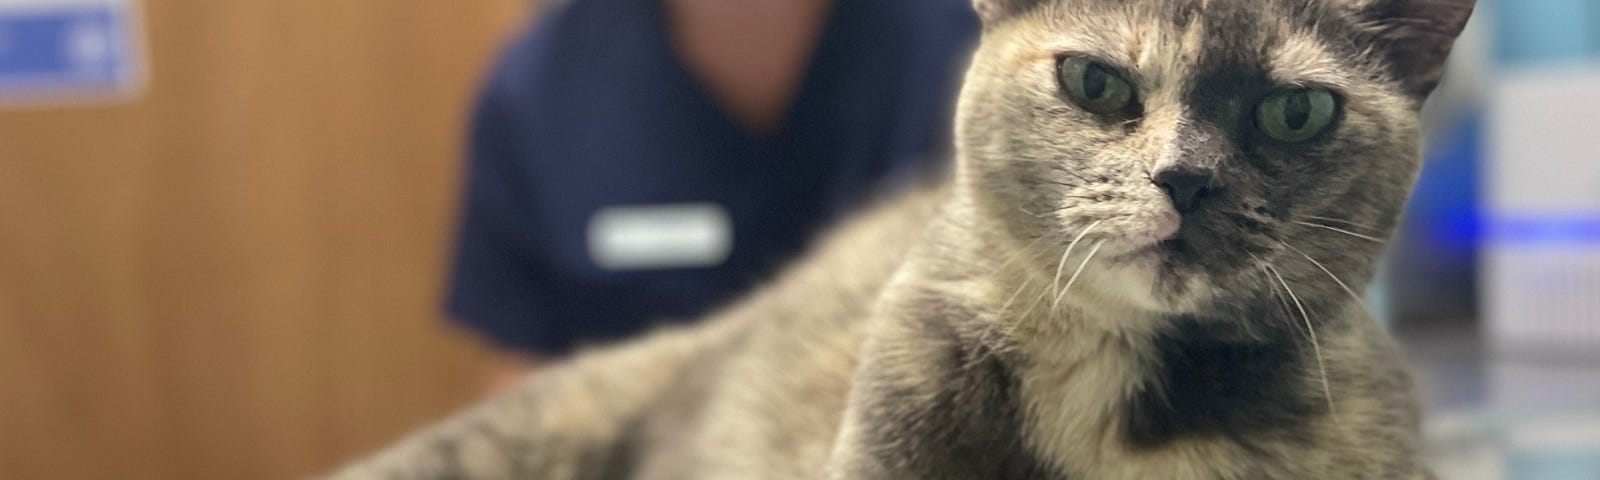 My dilute tortie stares down the camera while at the vet.